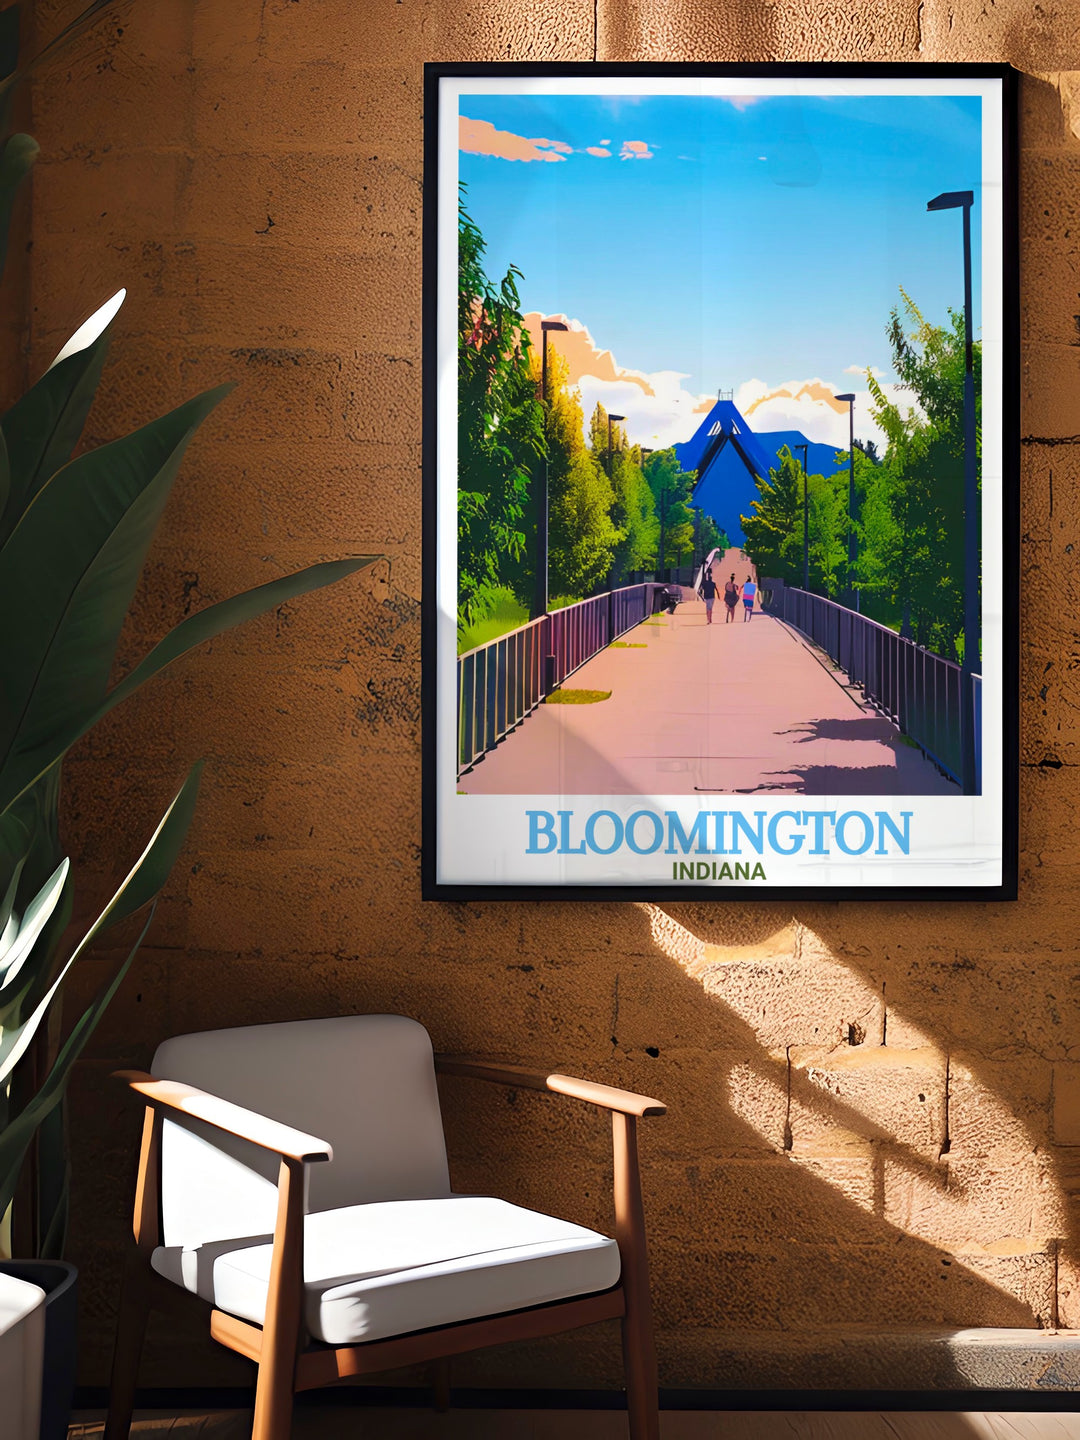 Bloomington Indiana B Line Trail prints capturing the unique allure of the trail with a blend of vintage and modern art suitable for various decor styles making it an excellent choice for home decoration or thoughtful gifts